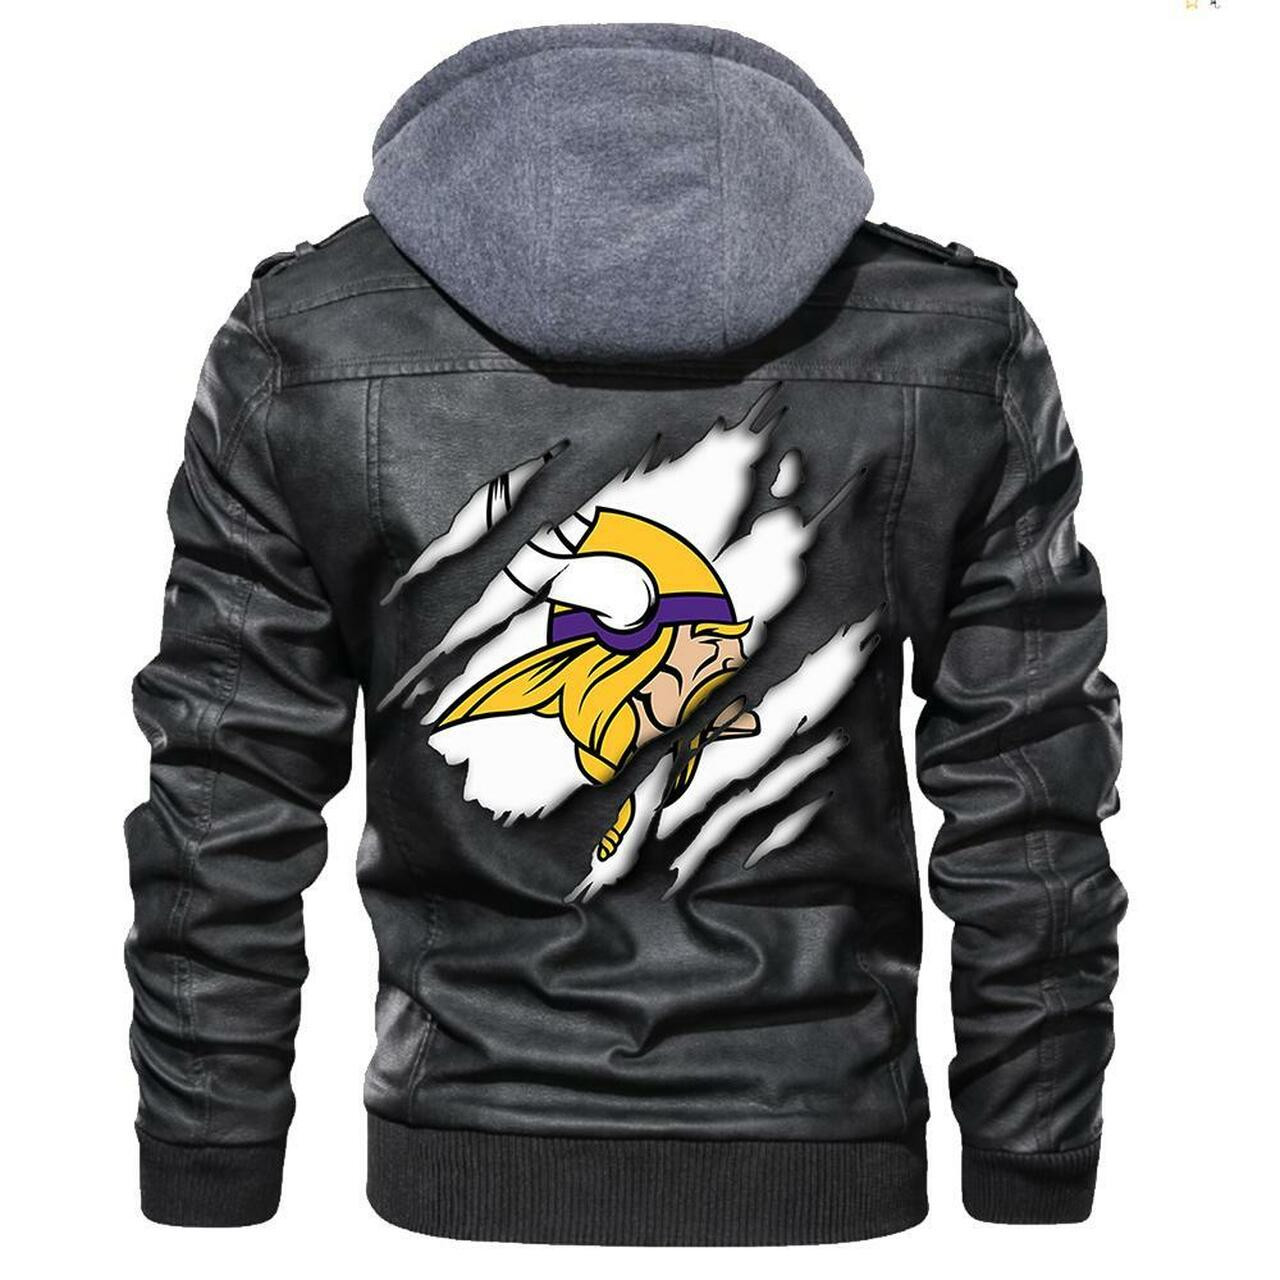 This leather Jacket will look great on you and make you stand out from the crowd 277